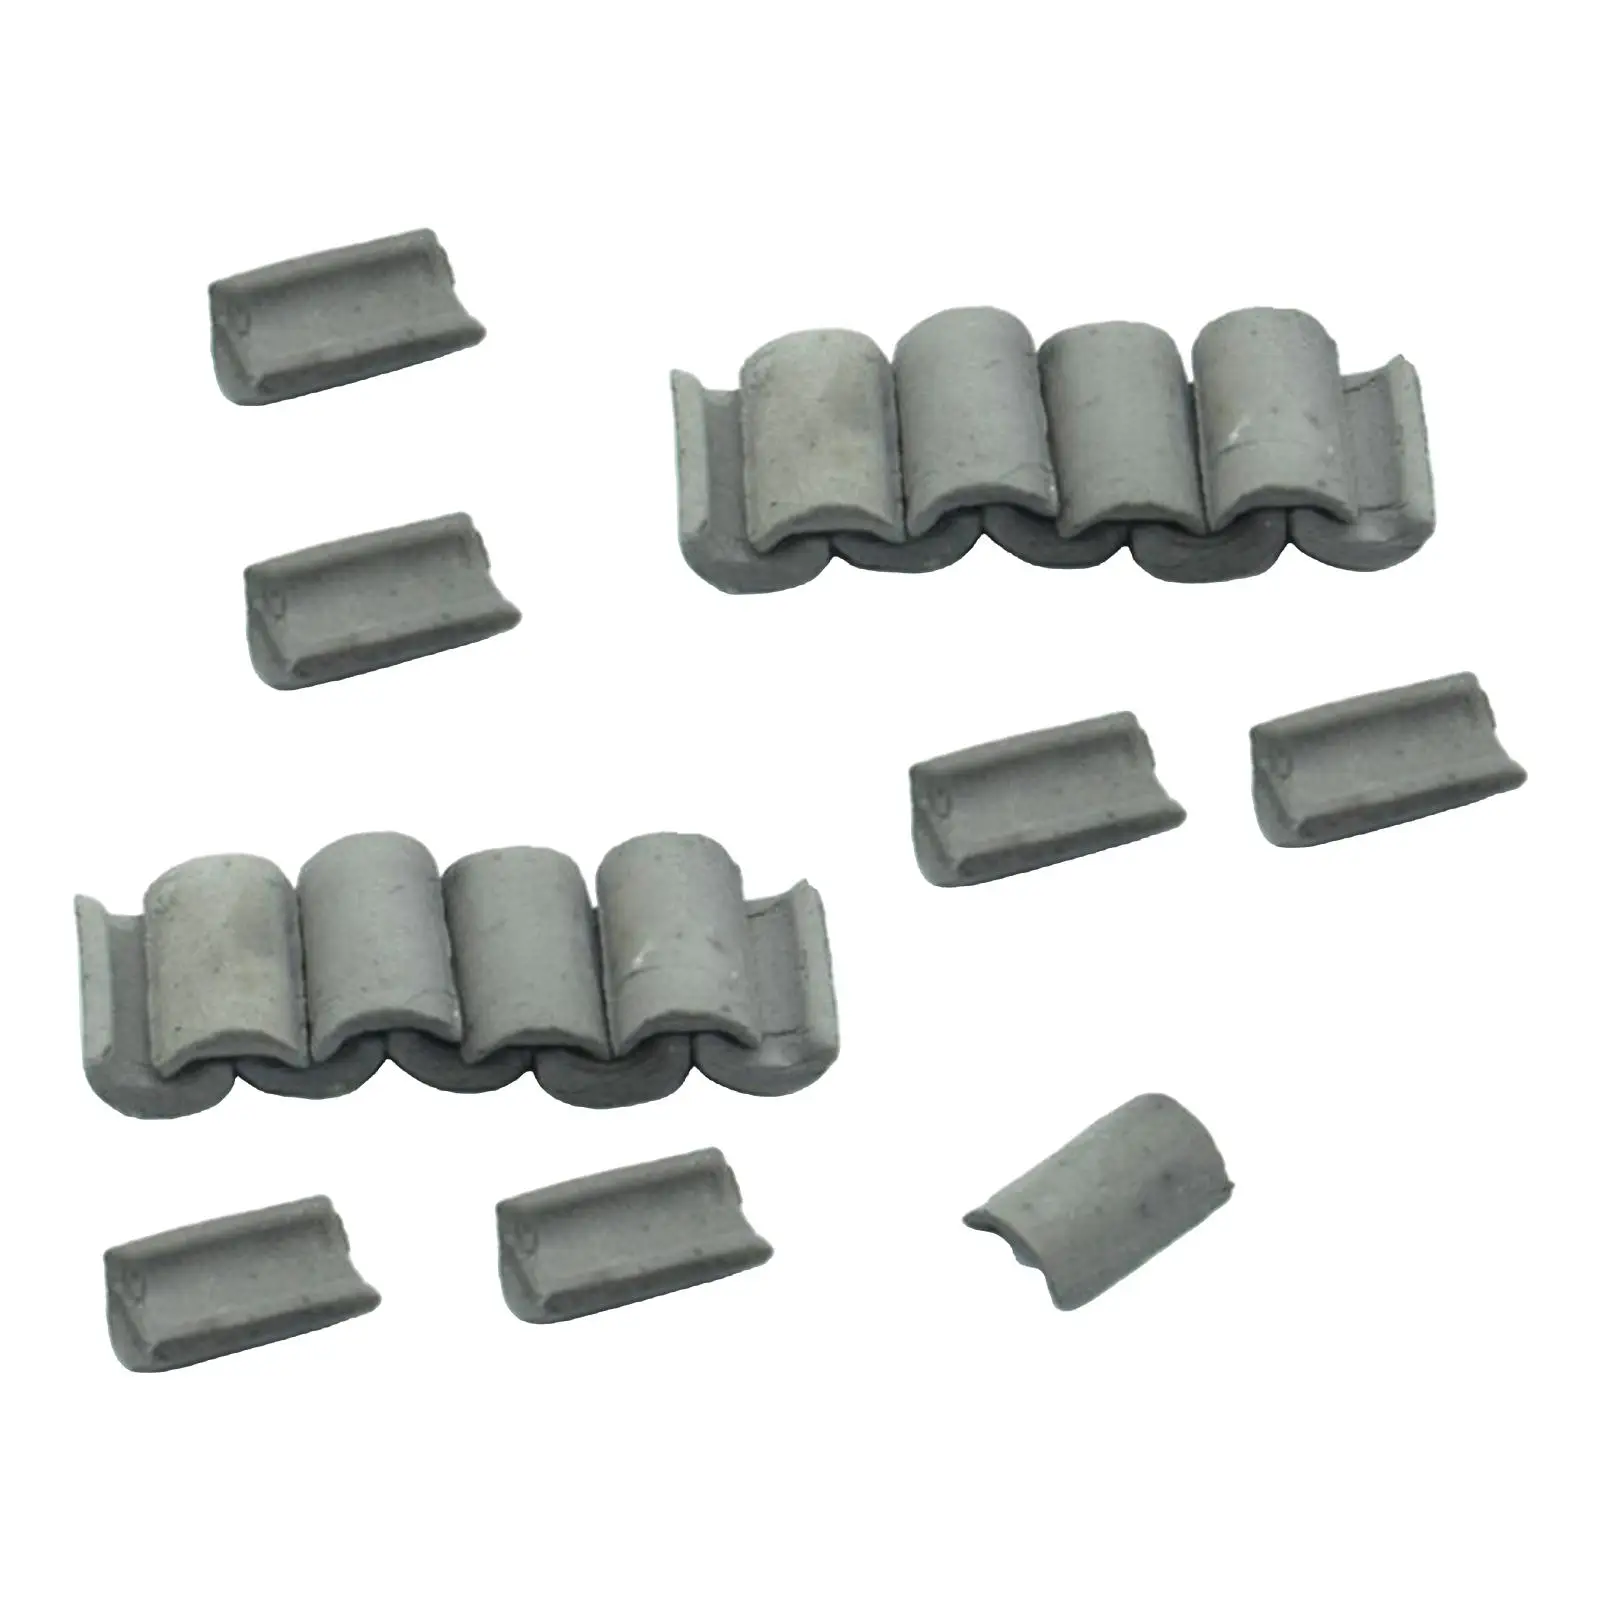 25 Pieces Miniature Roof Tiles Figurine for Landscaping Role Play Boys Girls